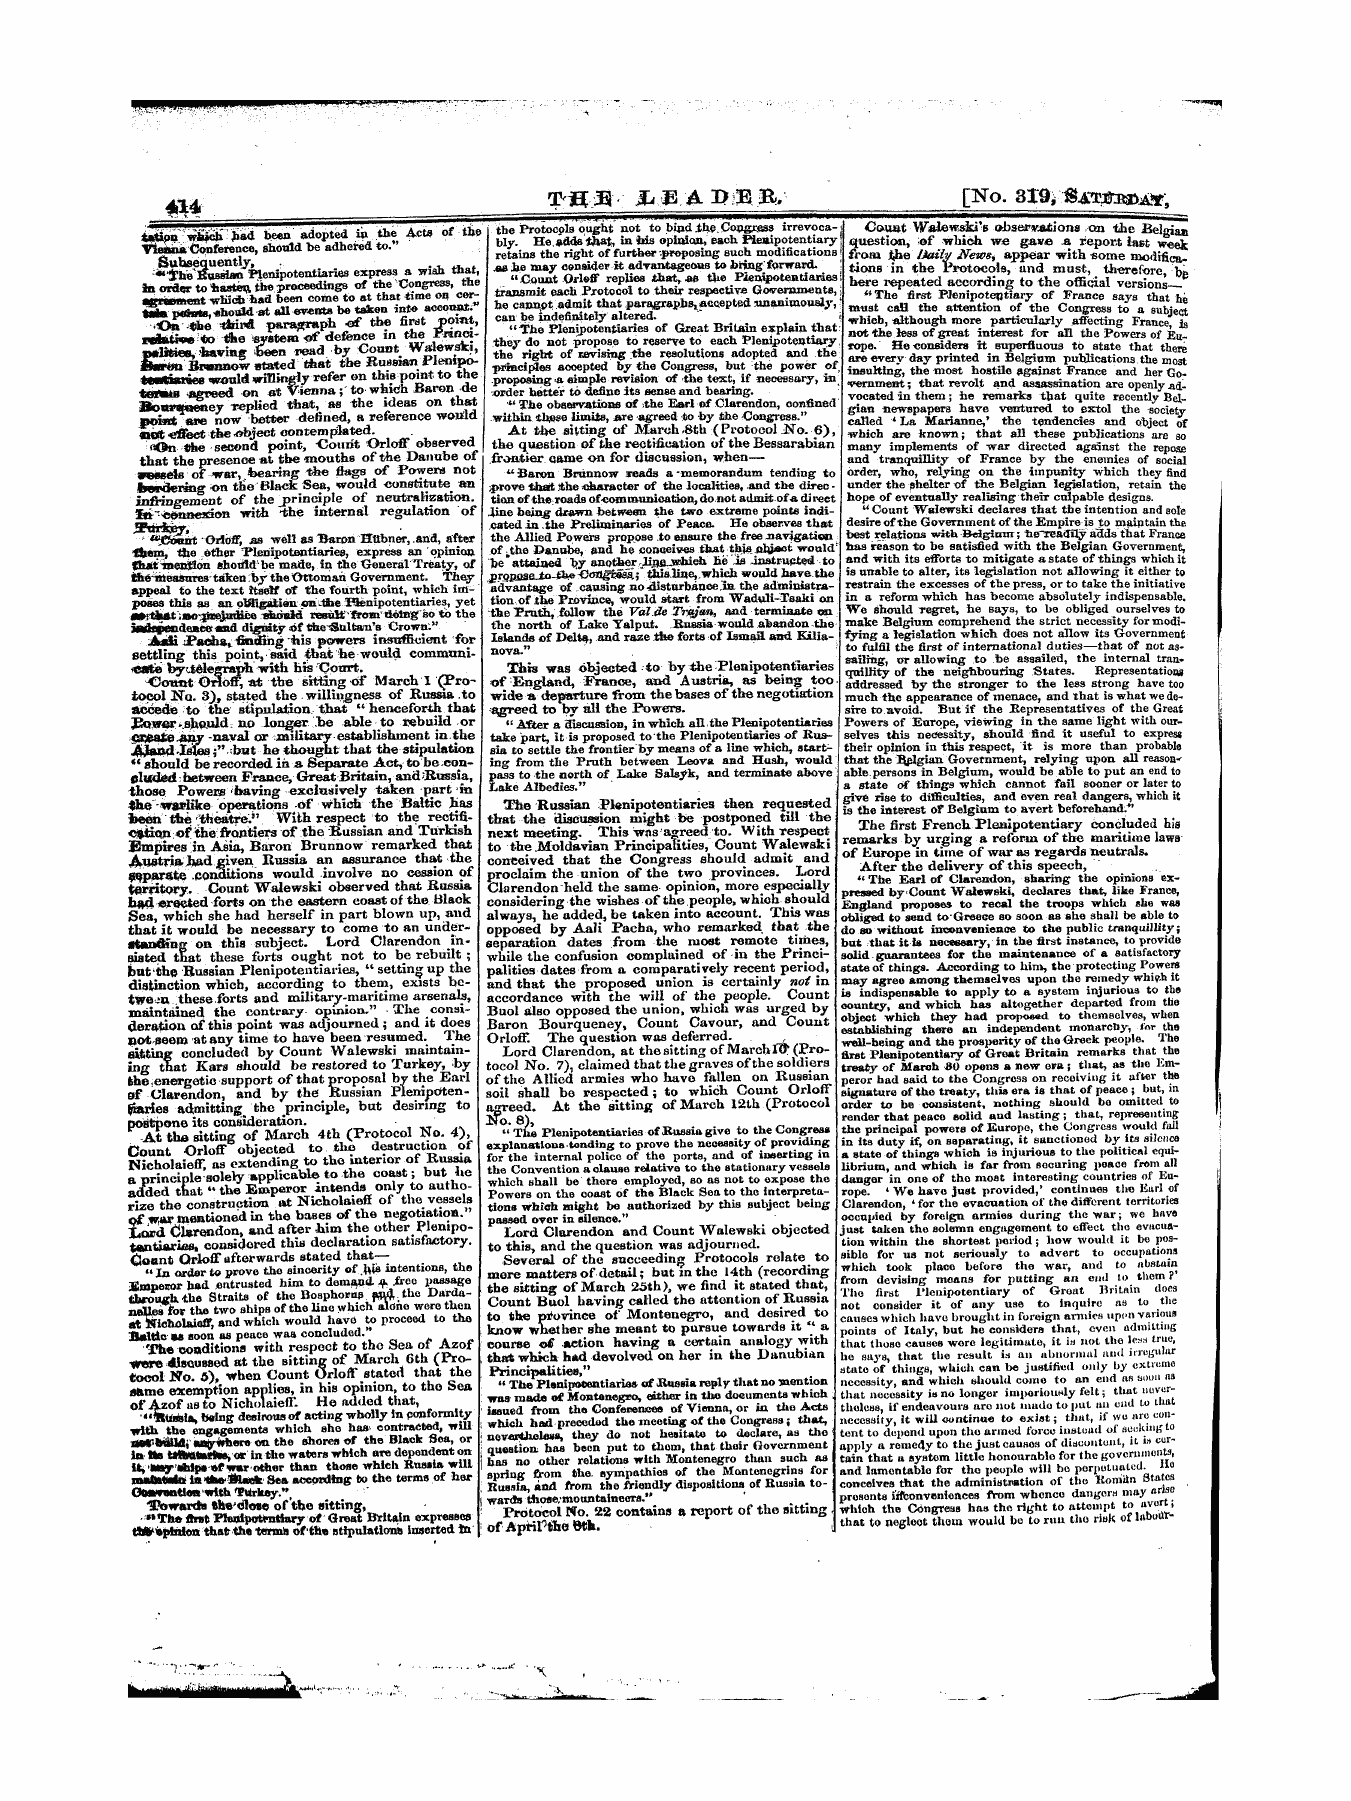 Leader (1850-1860): jS F Y, 1st edition - Untitled Article